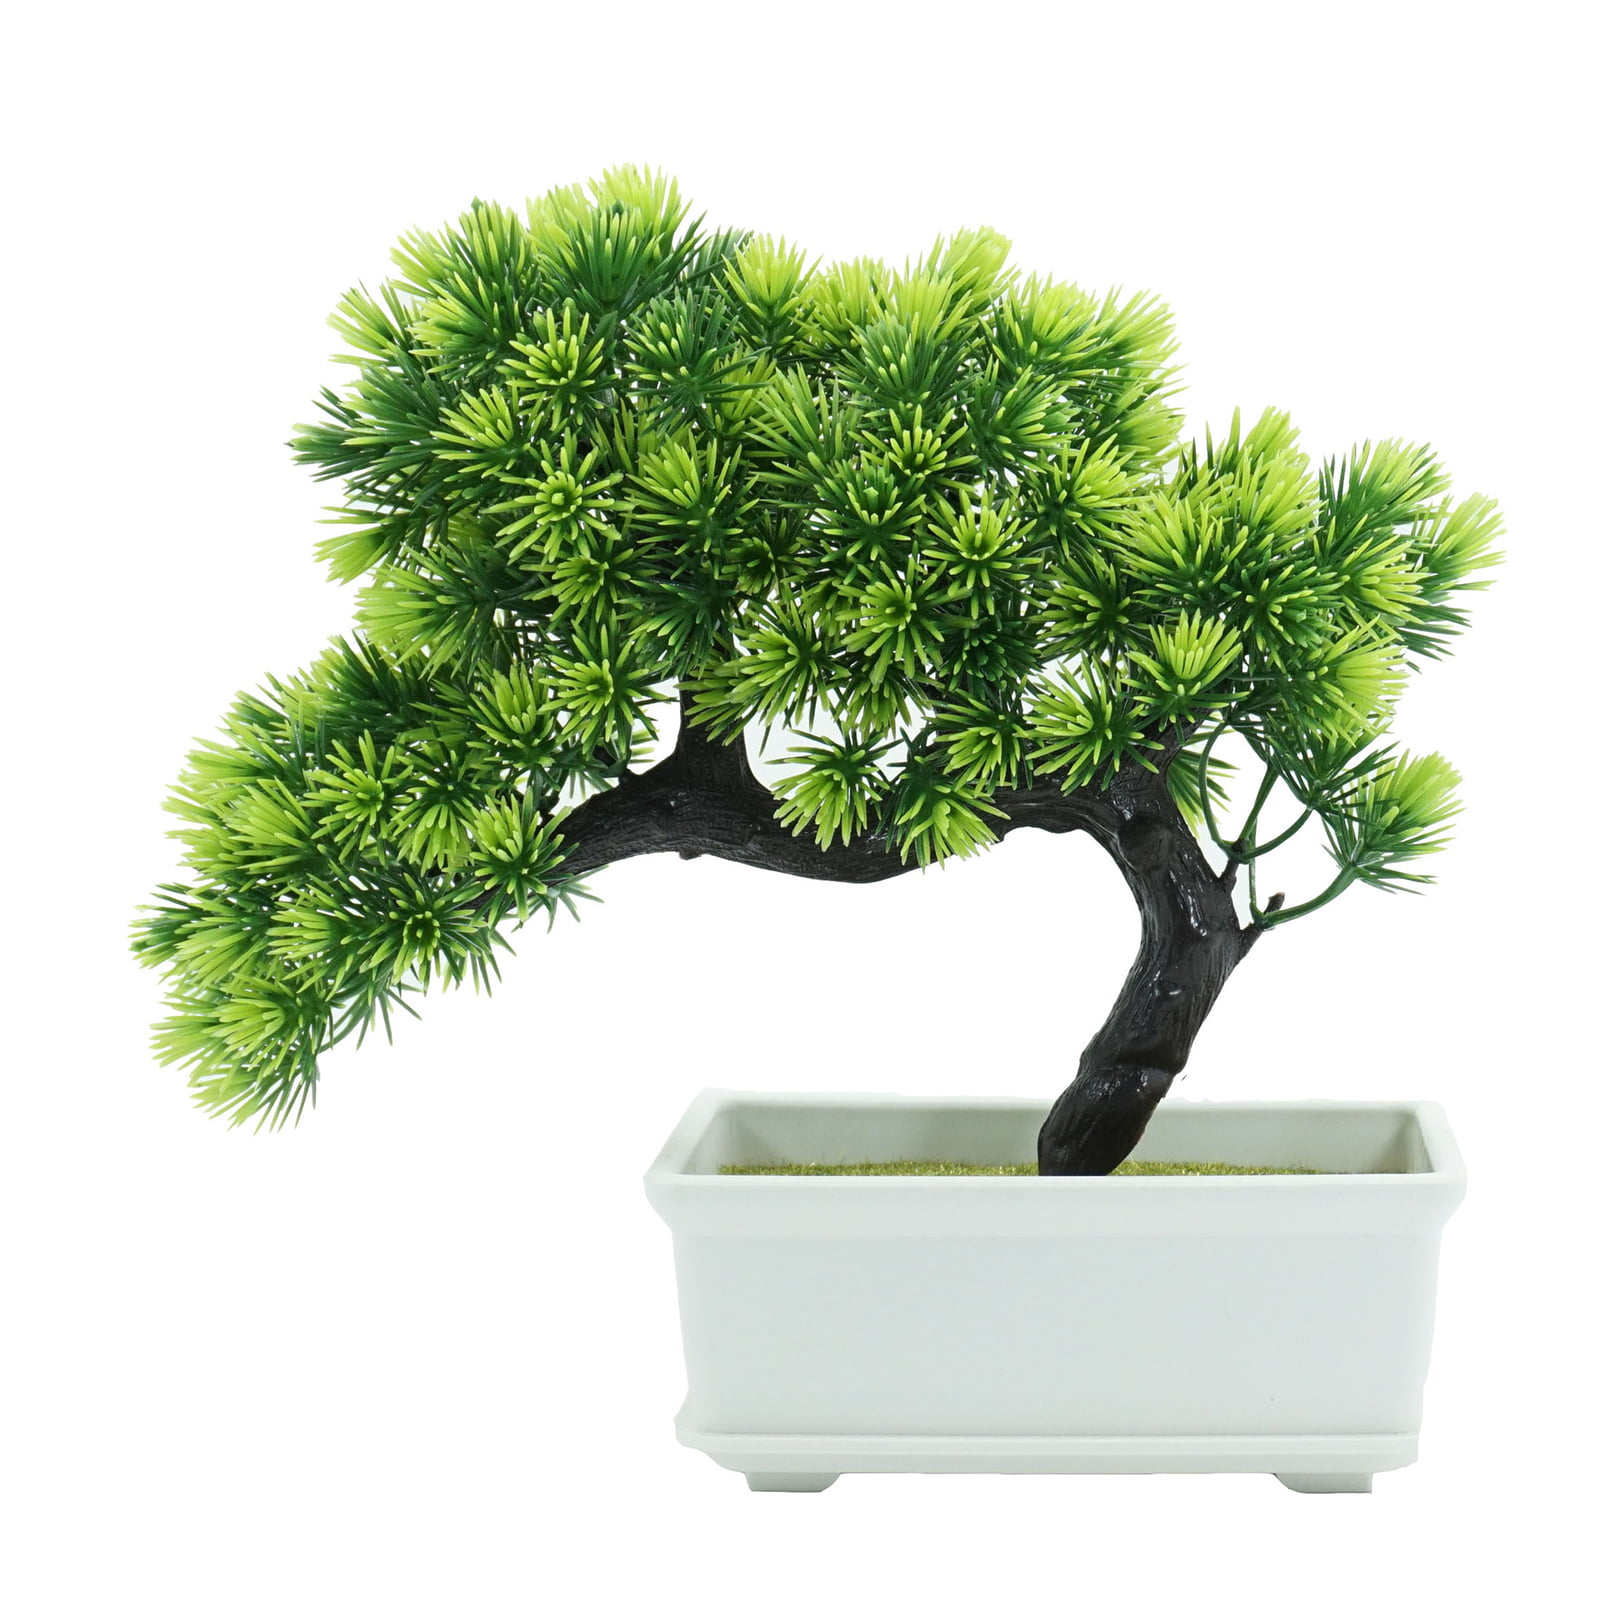 Artificial Bonsai Tree Potted Plant Table Craft Fake Ornaments Display Lifelike 